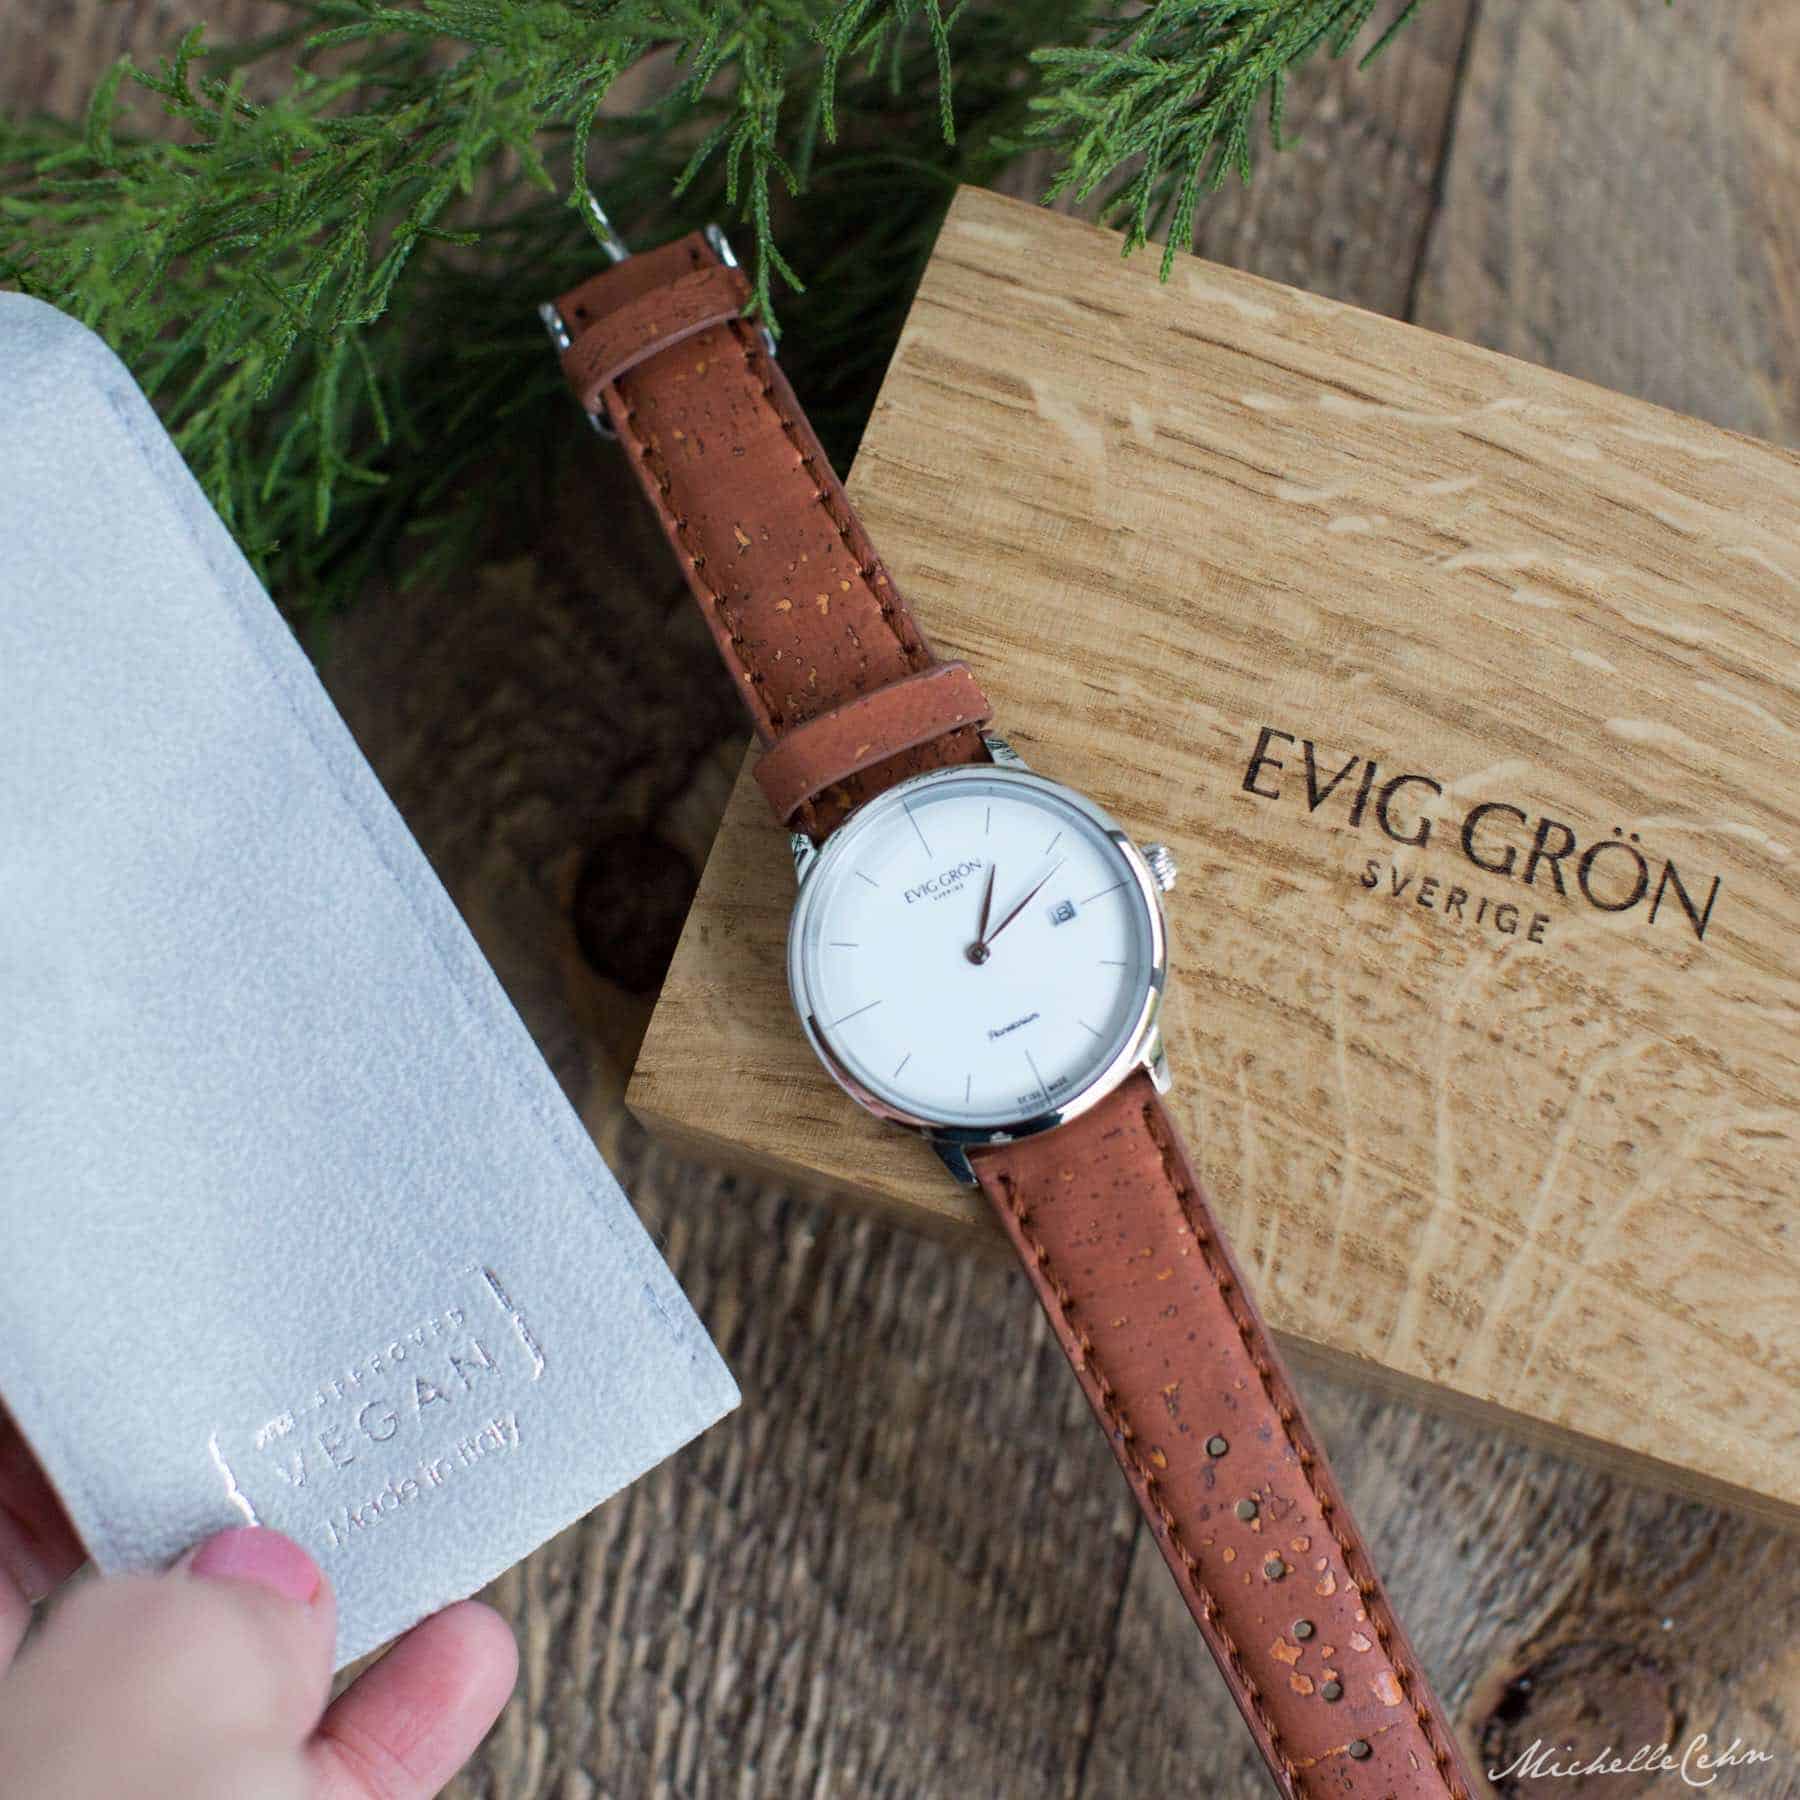 Evig Gron Watch Vegan Watch Brand on a Wooden Watch Box and a faux-suede Watch Case With PETA Approved Vegan Label